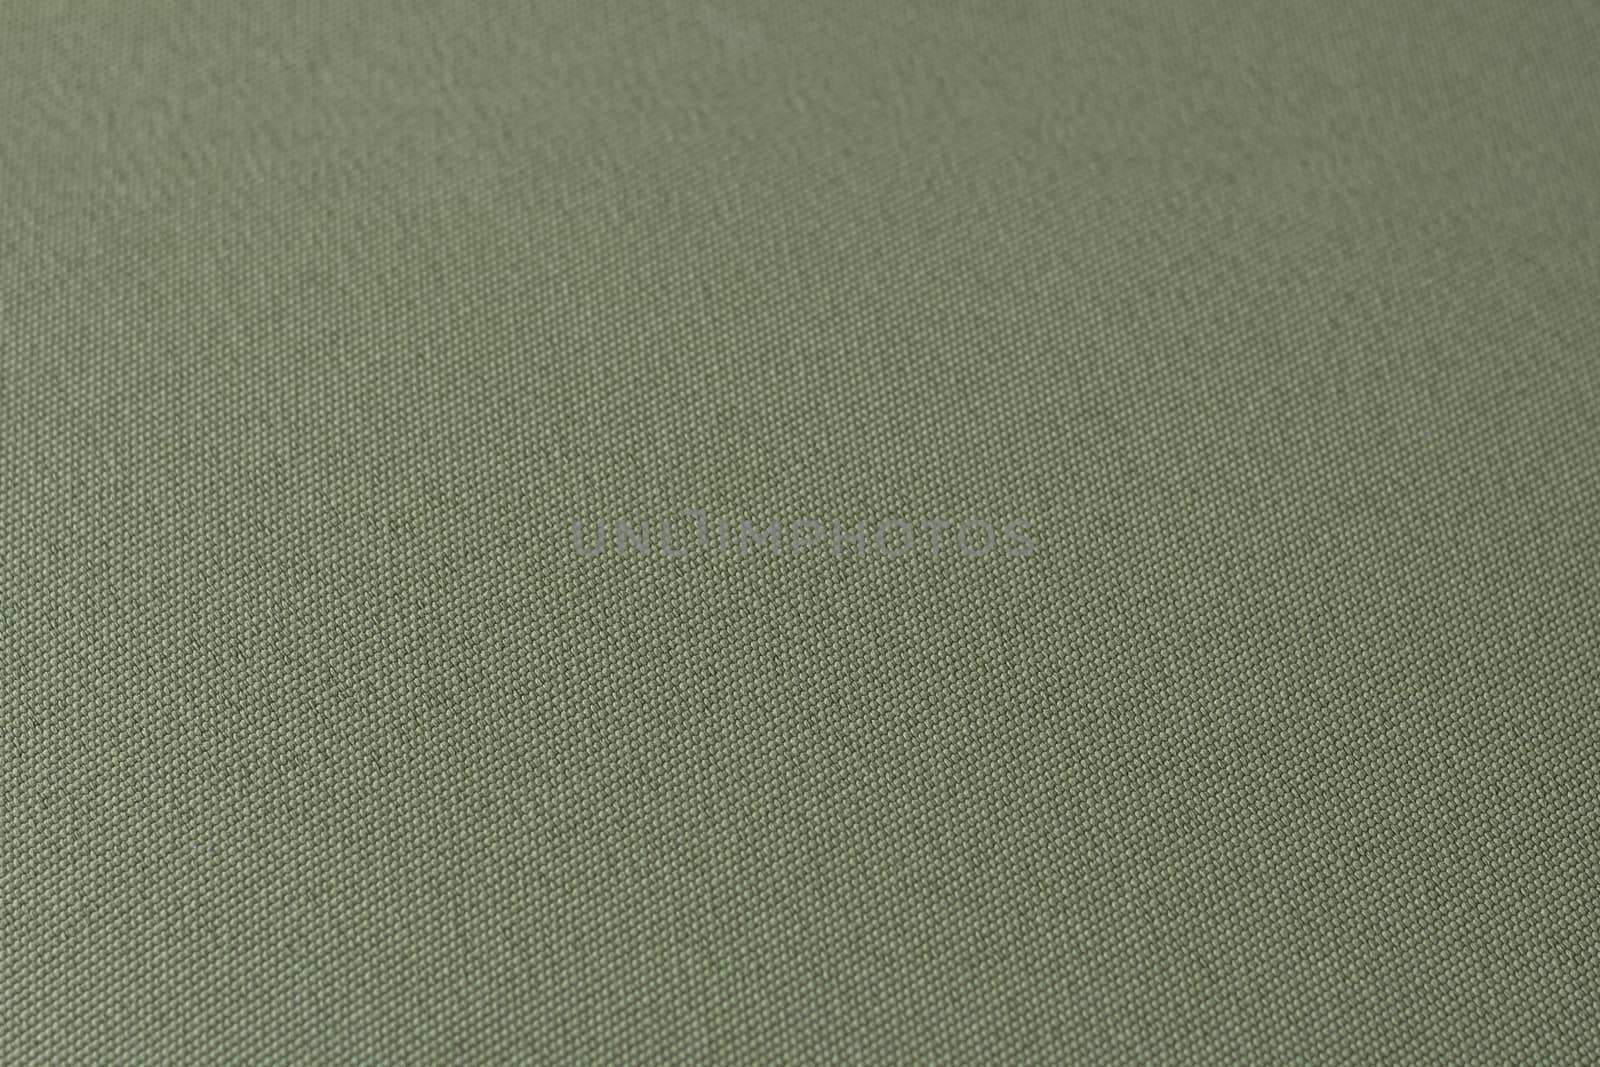 natural green fabric close-up background textile texture